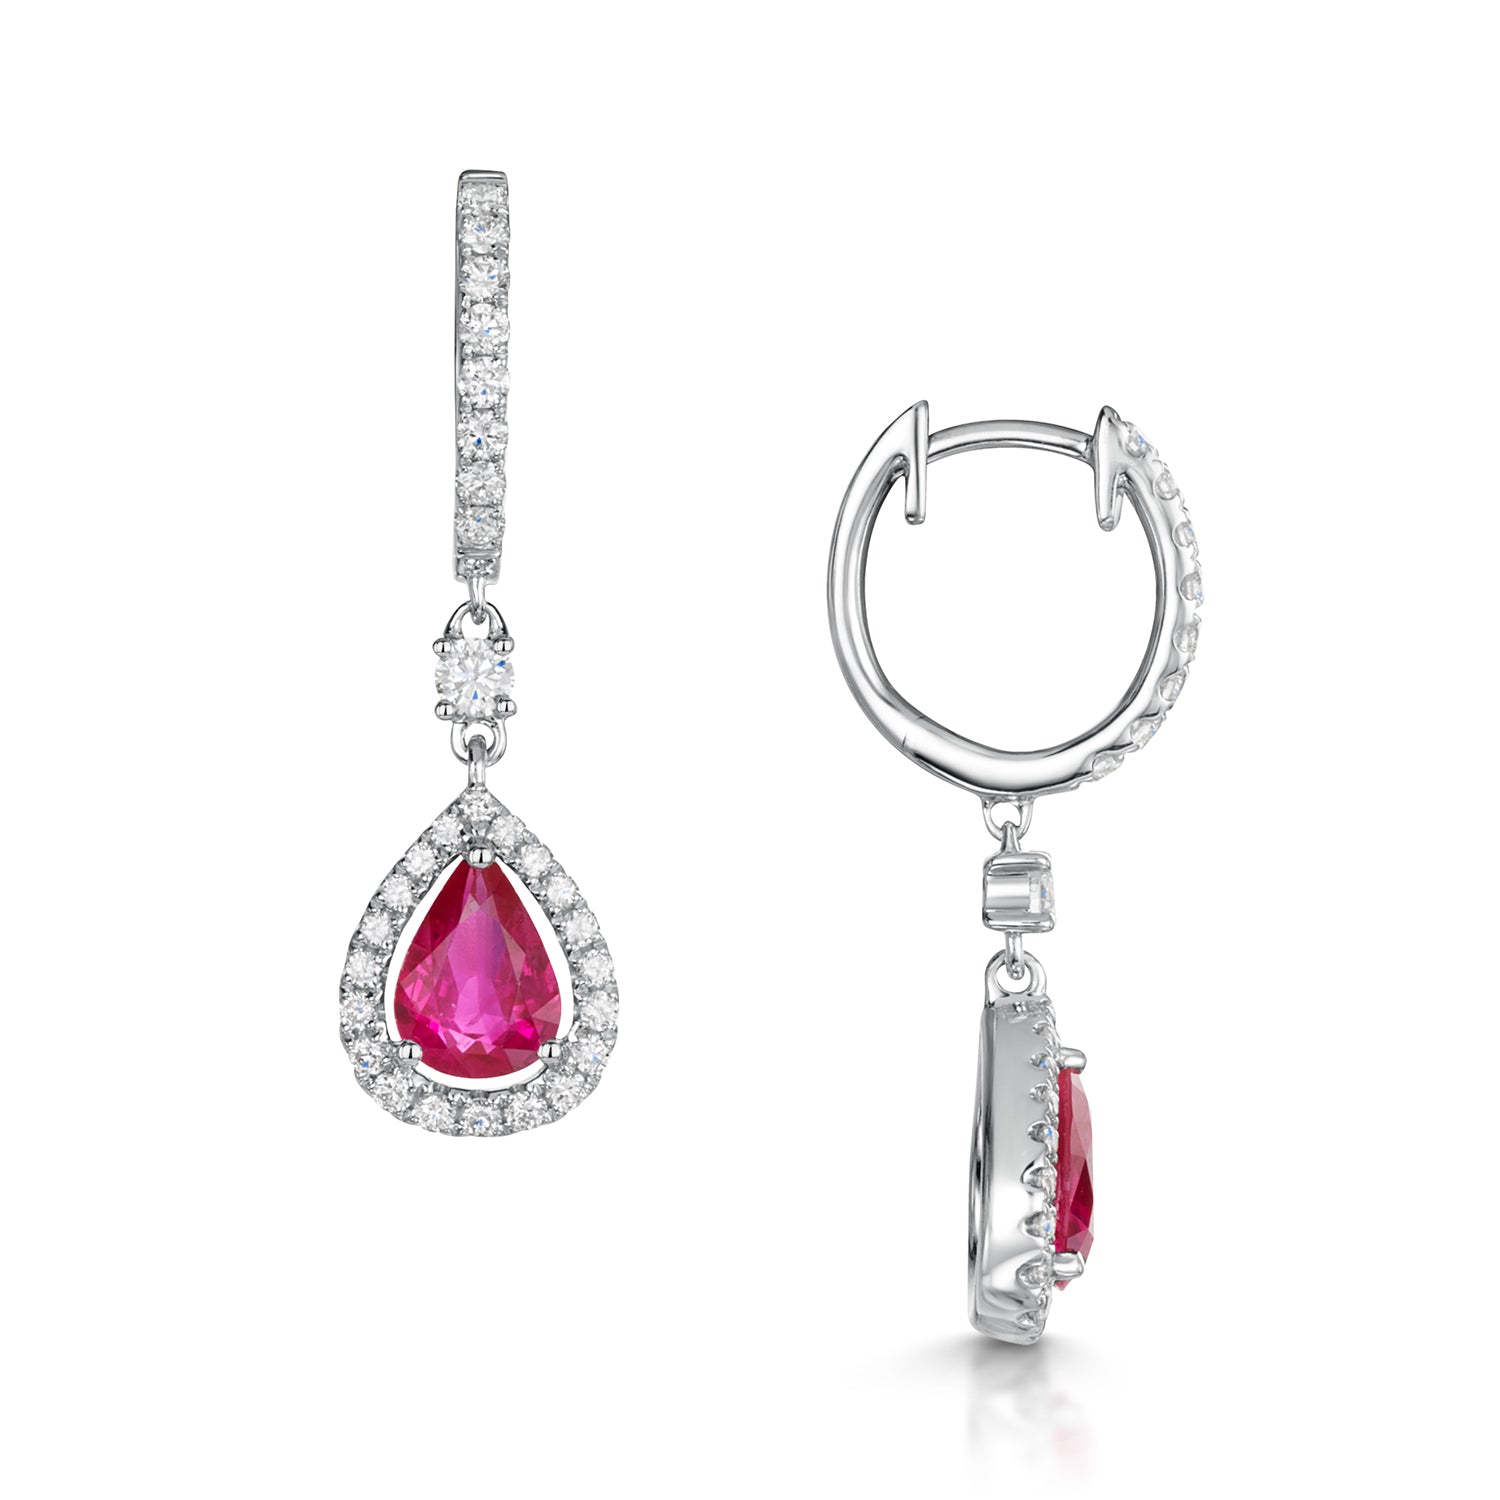 18ct White Gold Pear Shape Ruby And Diamond Drop Earrings